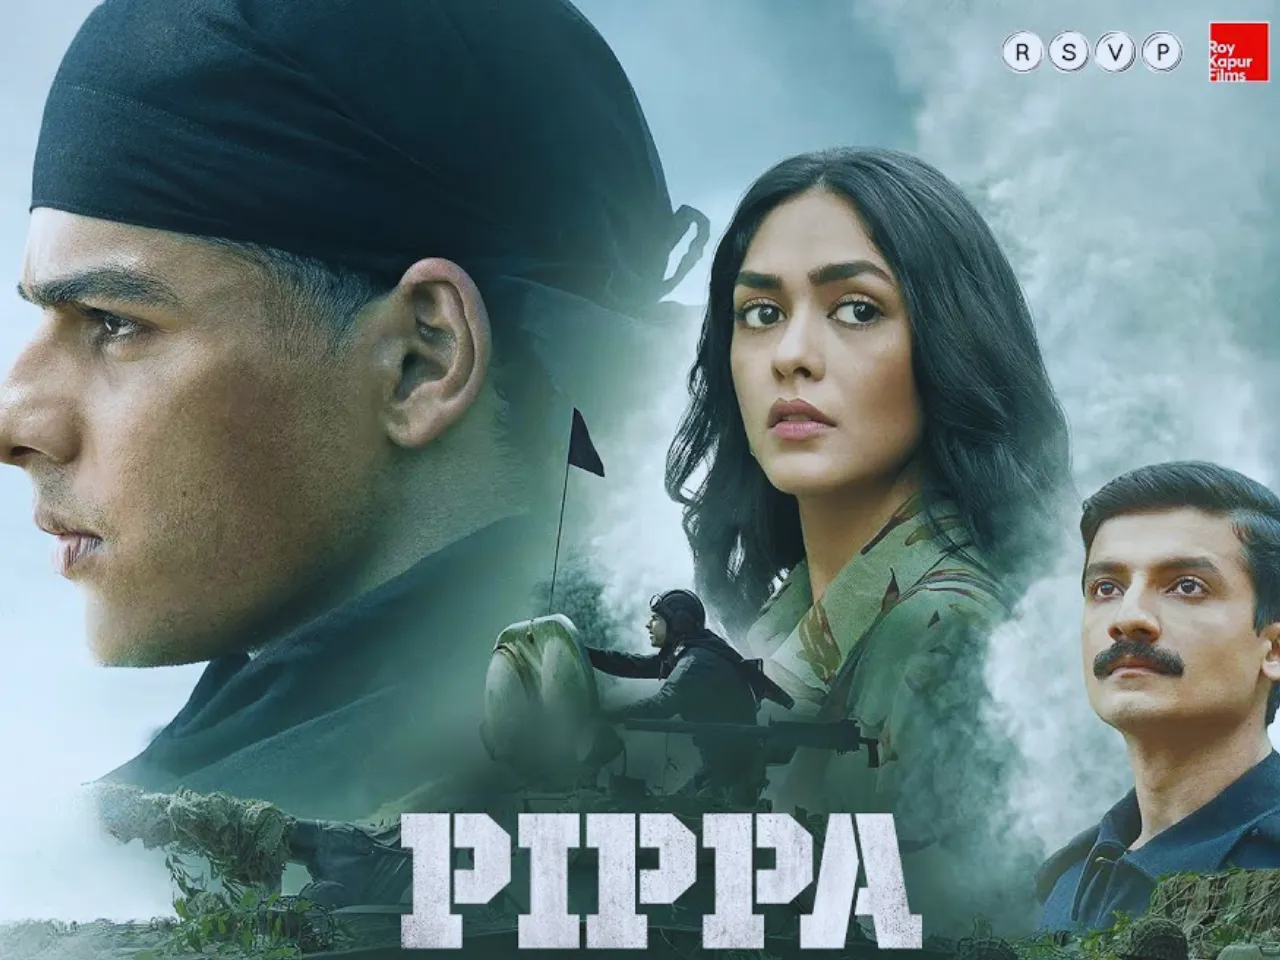 Pippa review: A silly and unimaginative war drama!